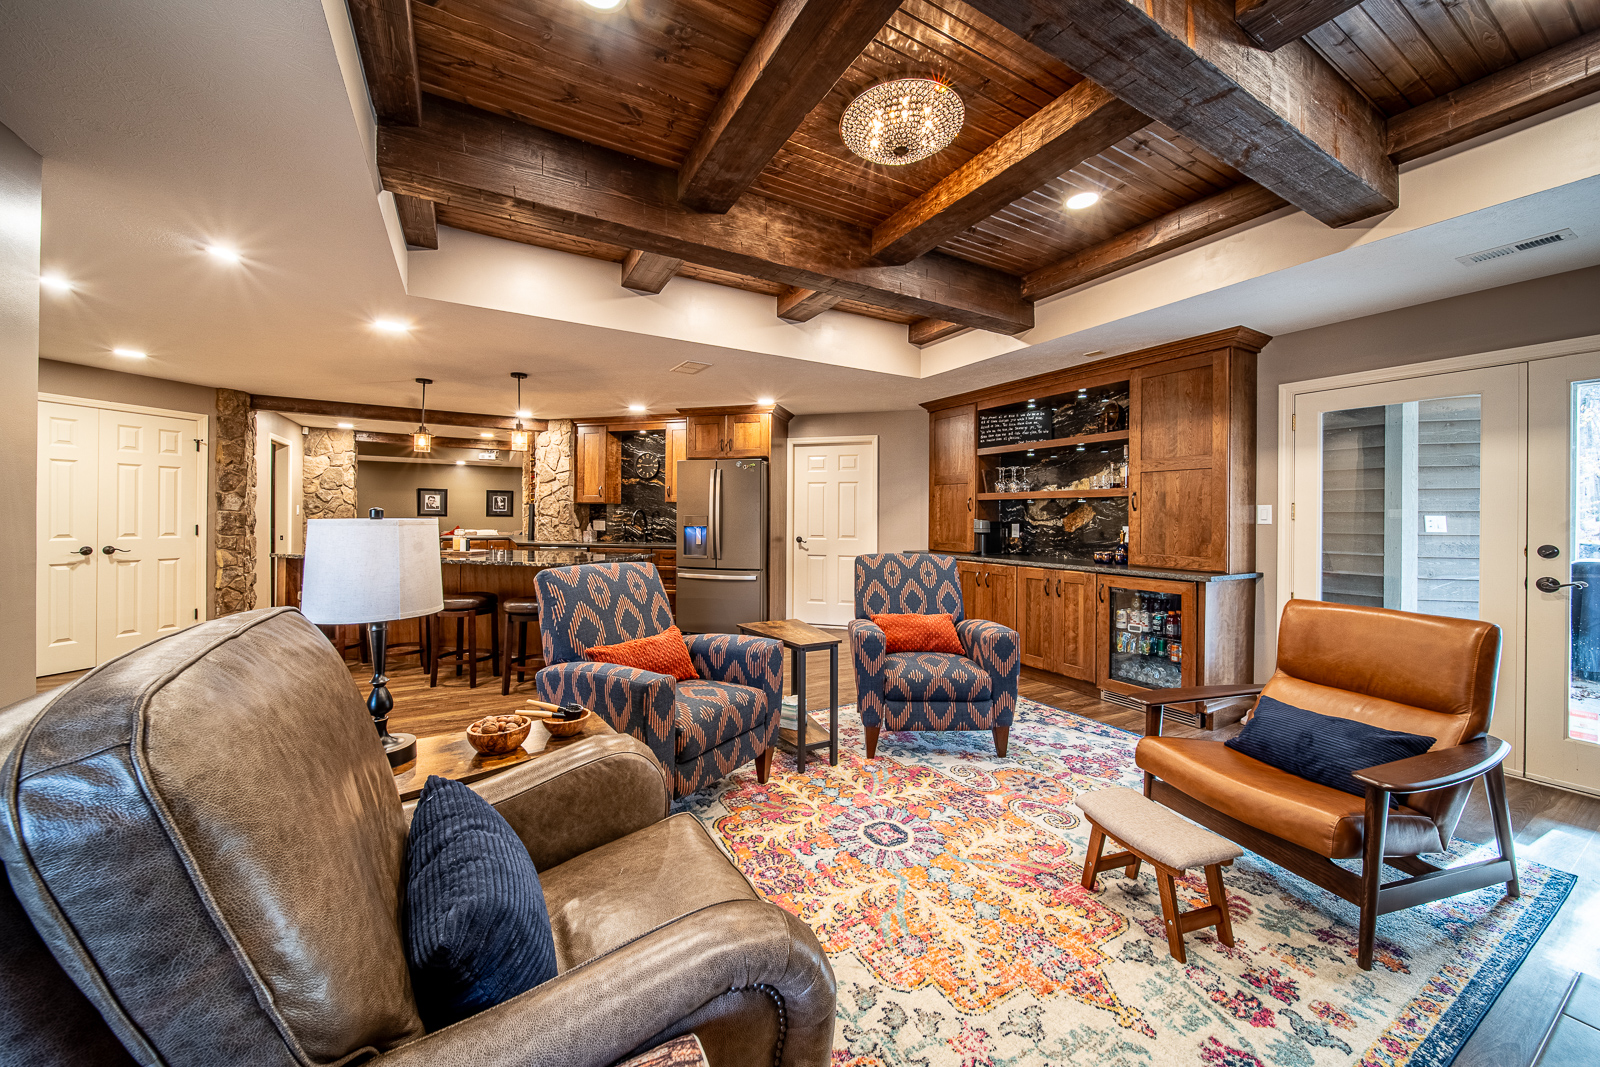 Ripple Creek Drive basement sitting area with a focus on wooden beams and fireplace.